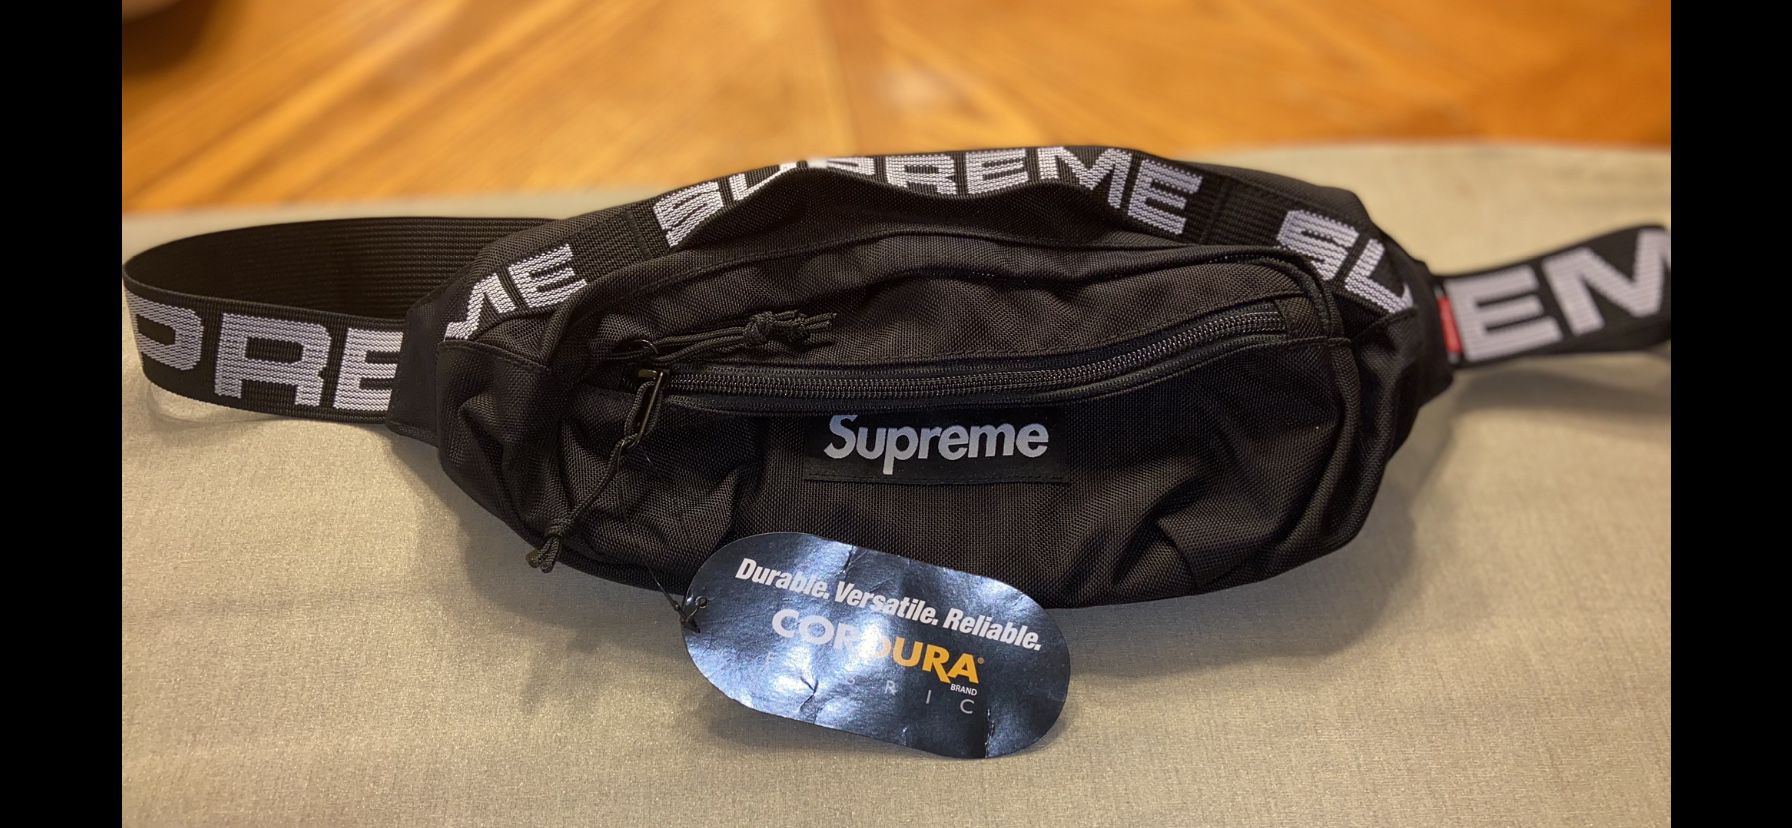 Surpreme Waist Bag (SS18) Feat: Dual Pockets And Supreme Branding On Both The Front And The Strap.